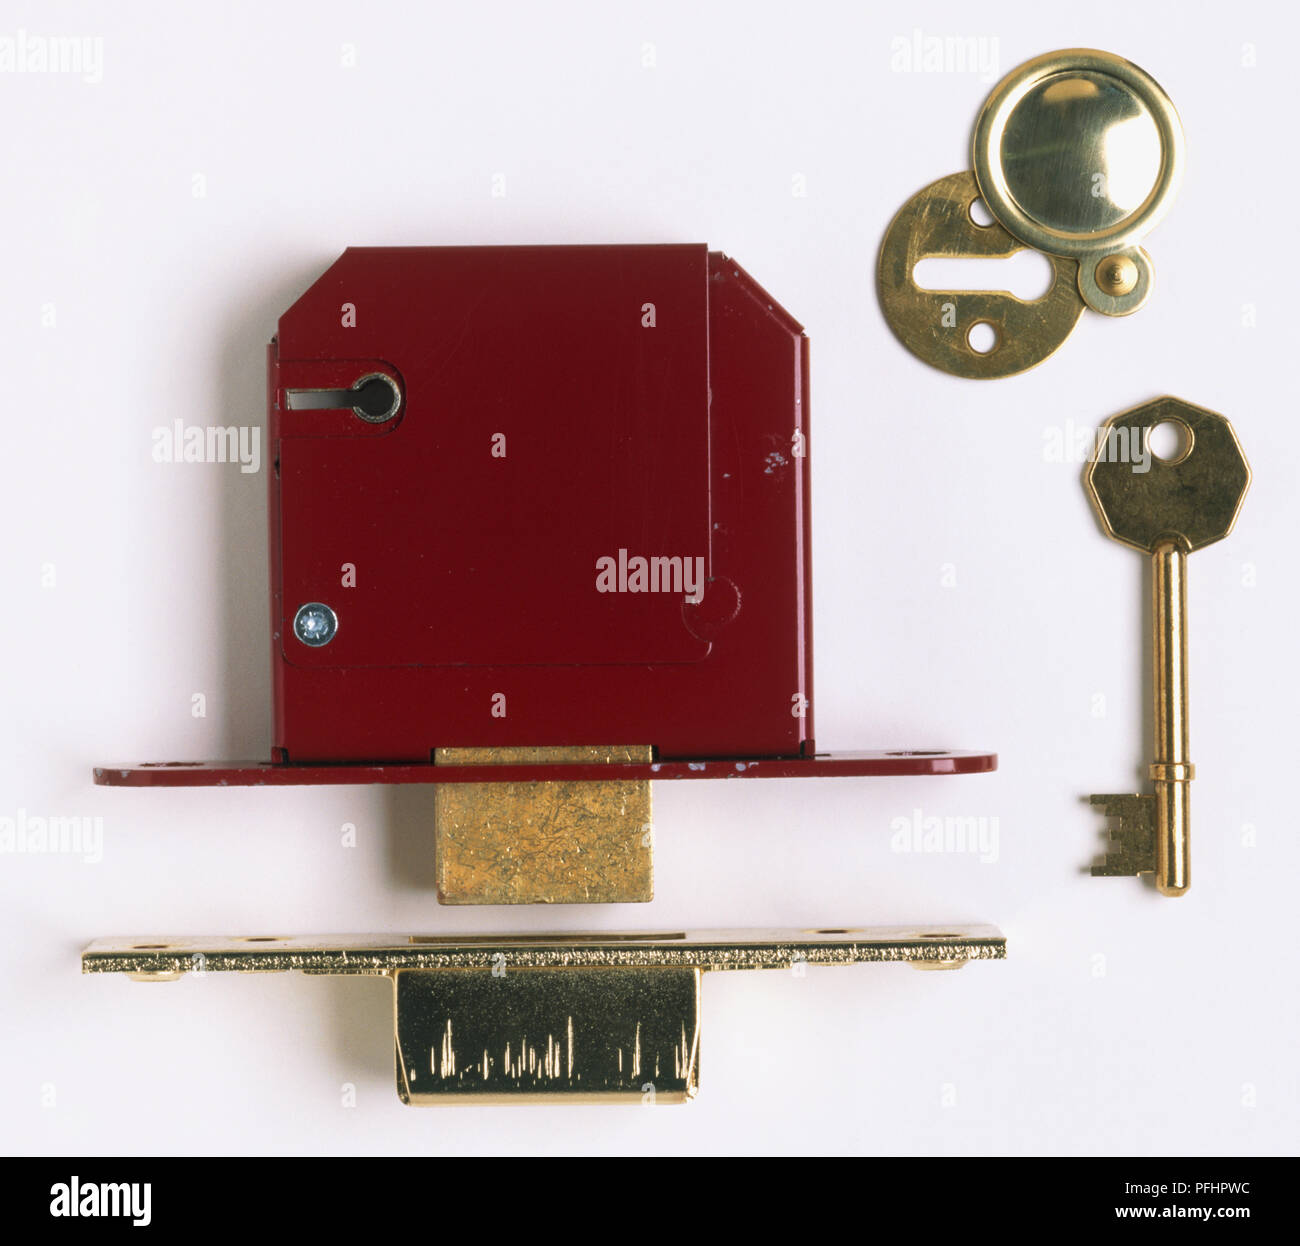 Parts of a door lock, including deadbolt, strike plate, key and keyhole frame, close up Stock Photo